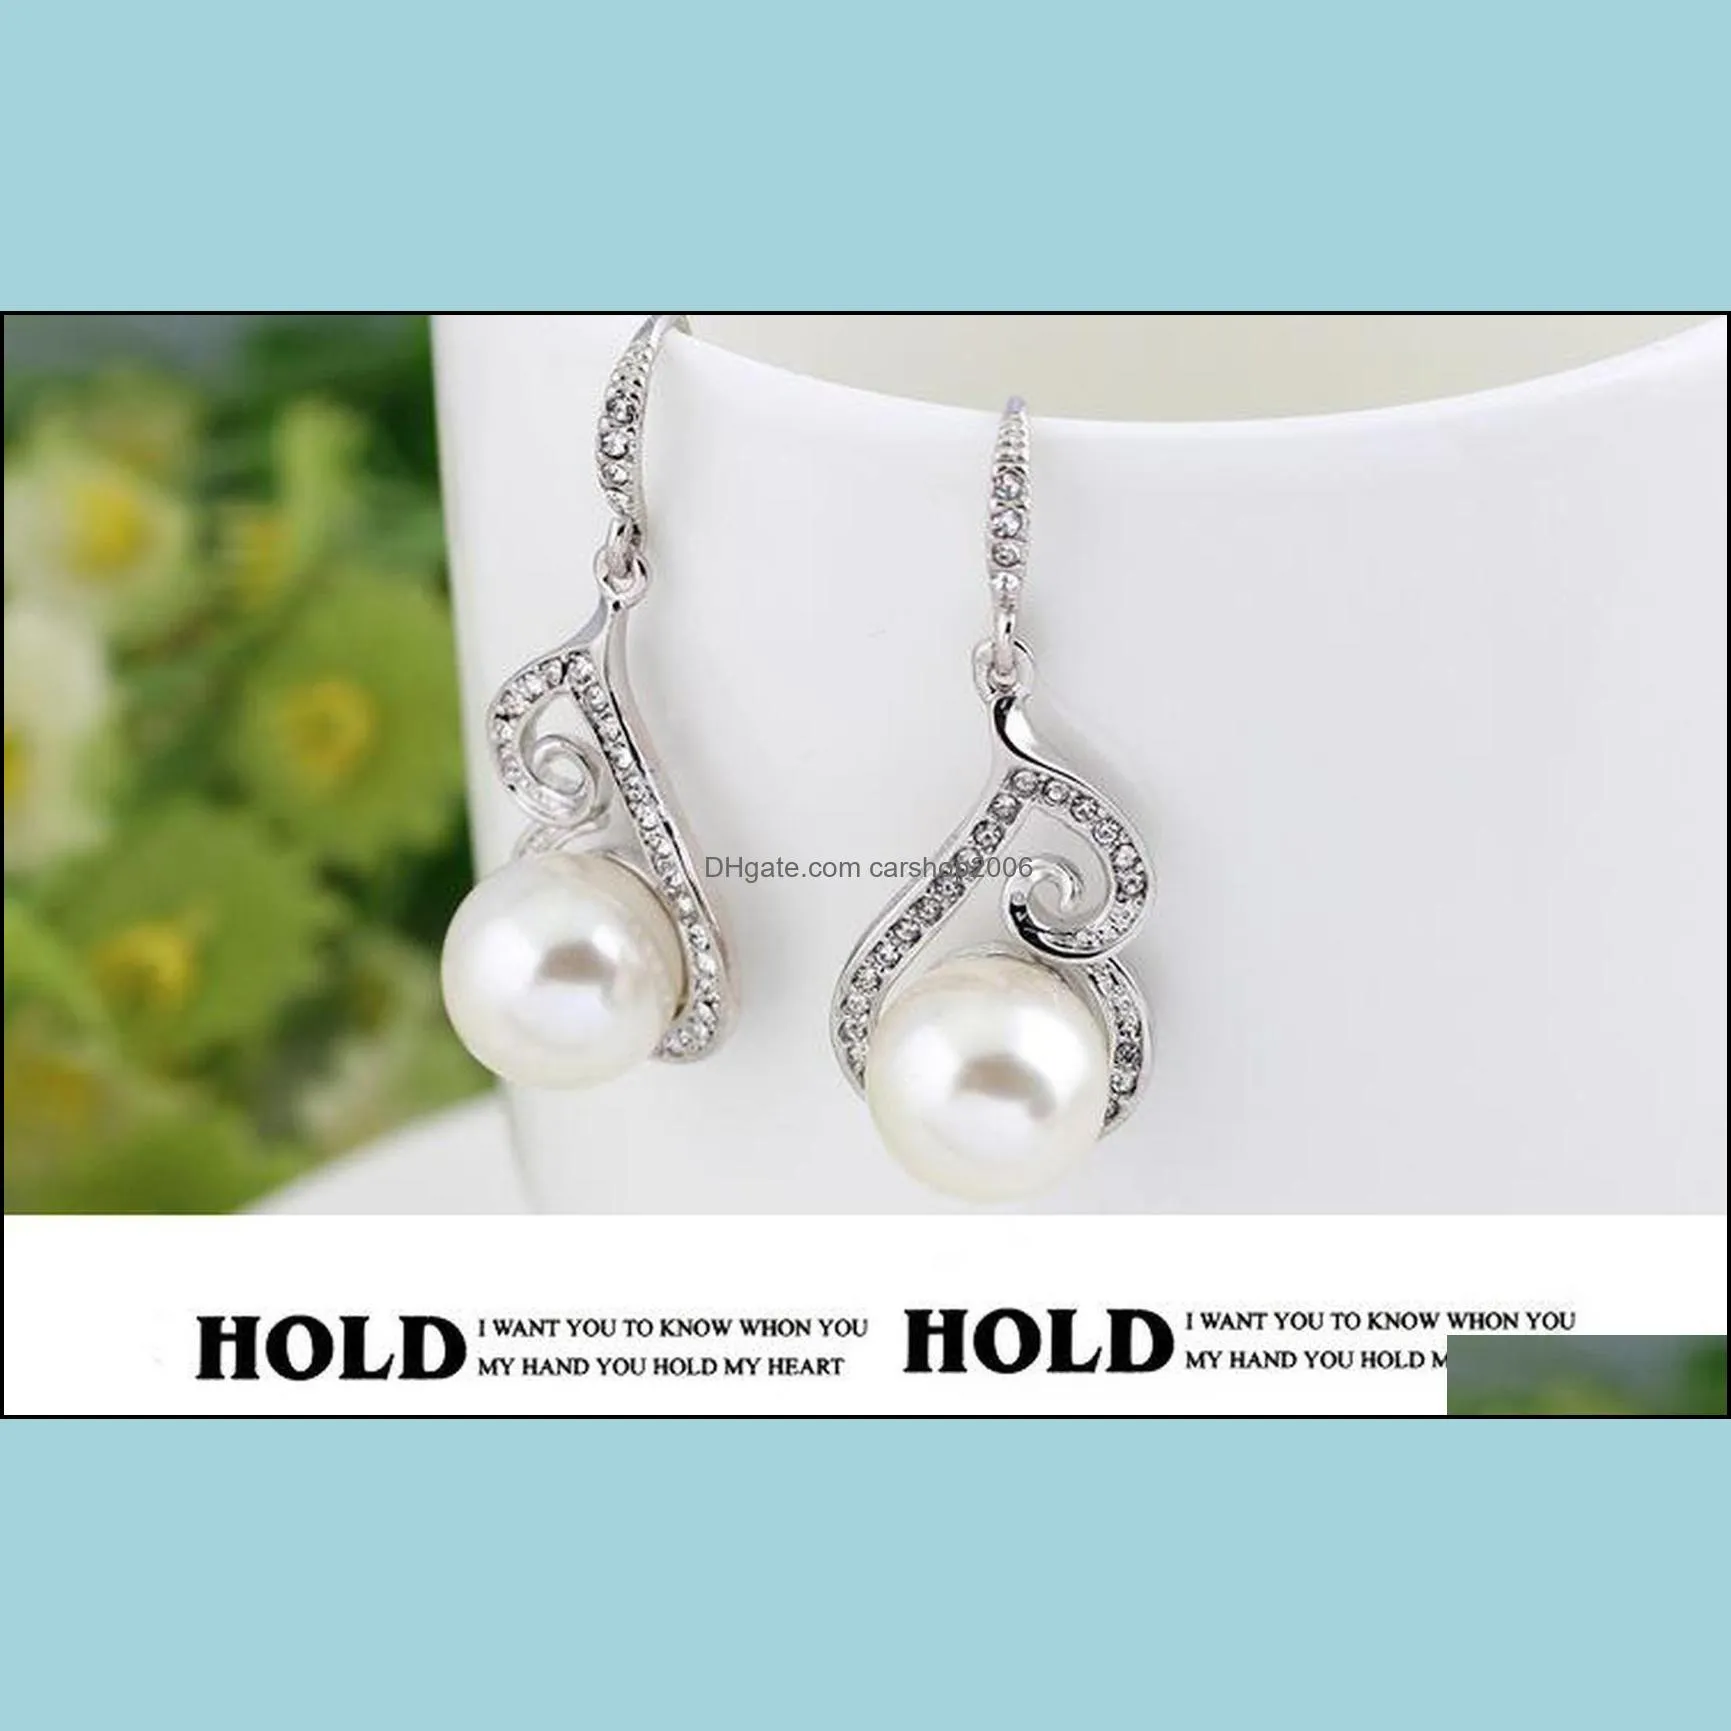 2020 Newest Women Crystal Pearl Pendant Necklace Earring Jewelry Set 925 Silver Chain Necklace Jewelry 12pcs Sale